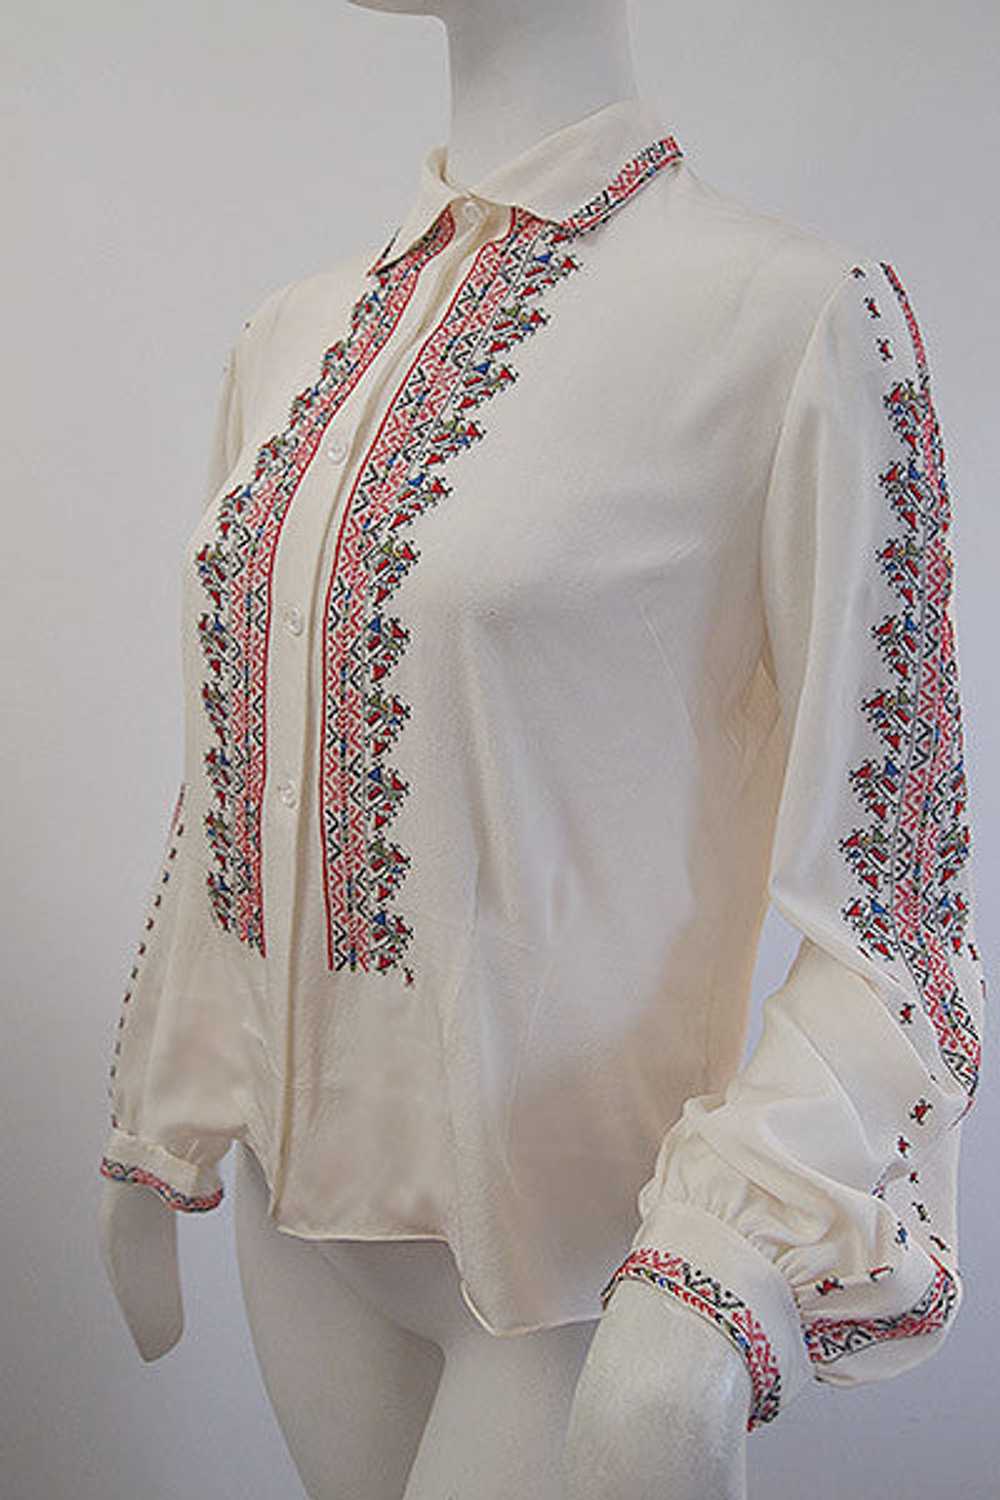 1950s Romanian Embroidered Peasant Blouse - image 5